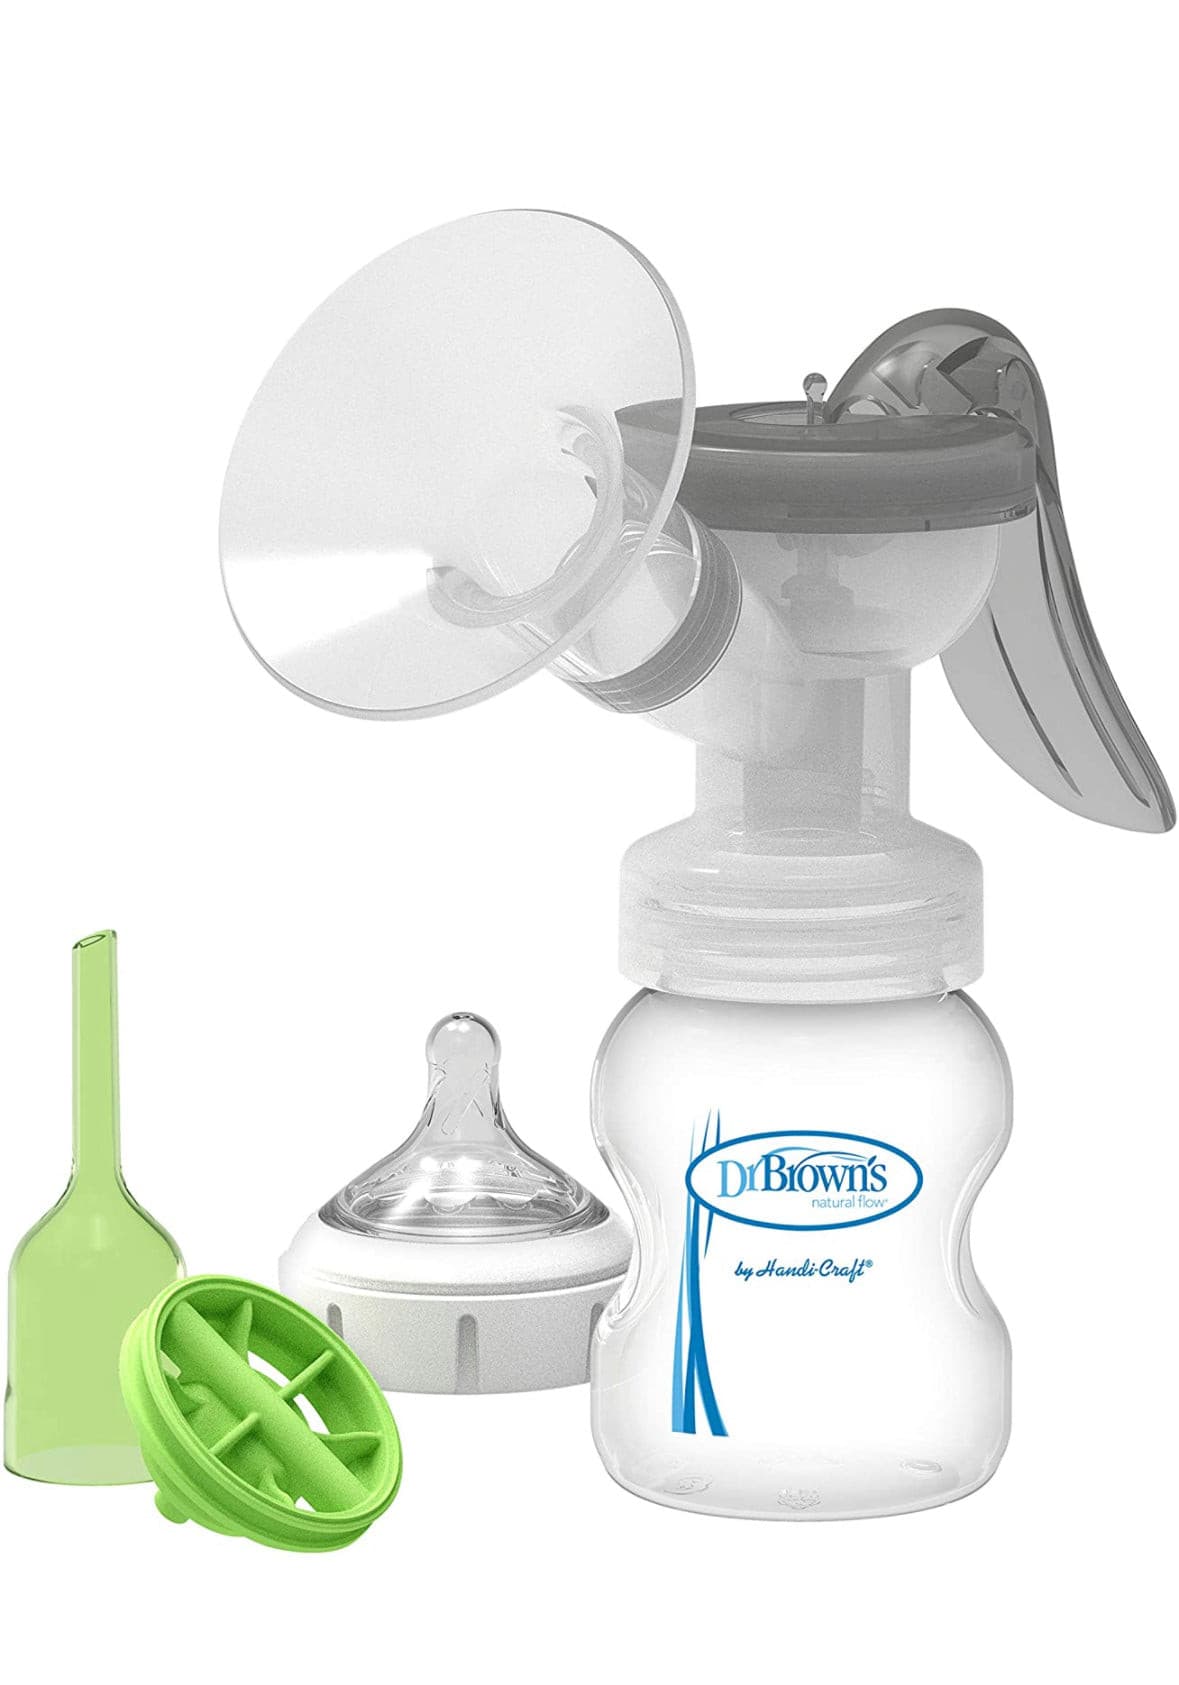 Dr. Brown's Manual Breast Pump with Softshape Silicone Shield.